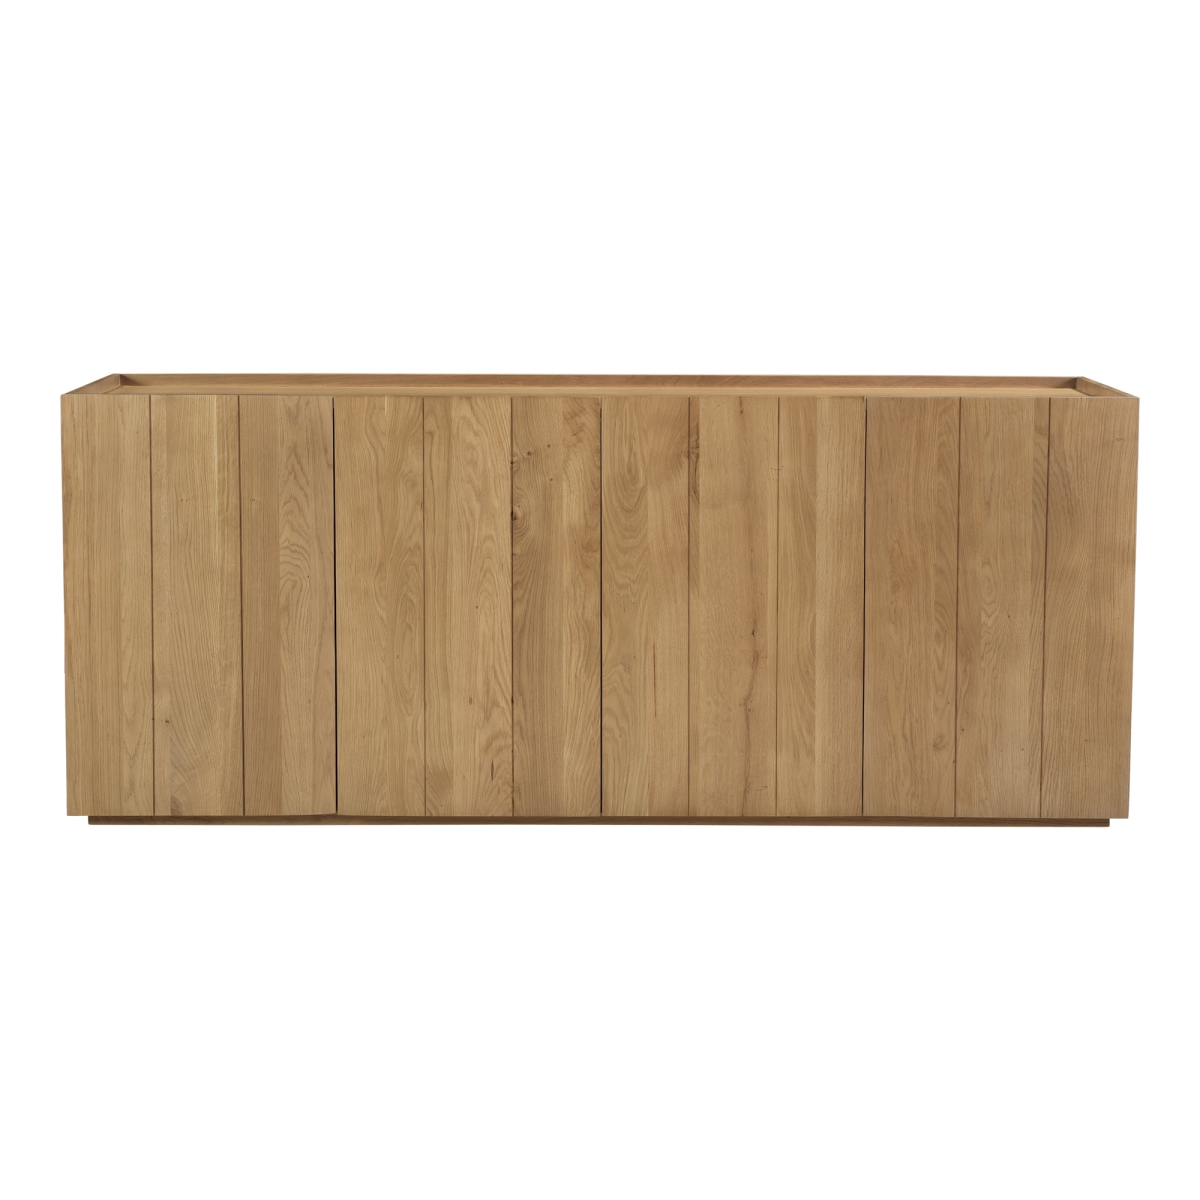 Picture of Moes Home RP-1020-24 Plank Sideboard Natural, Natural Oak